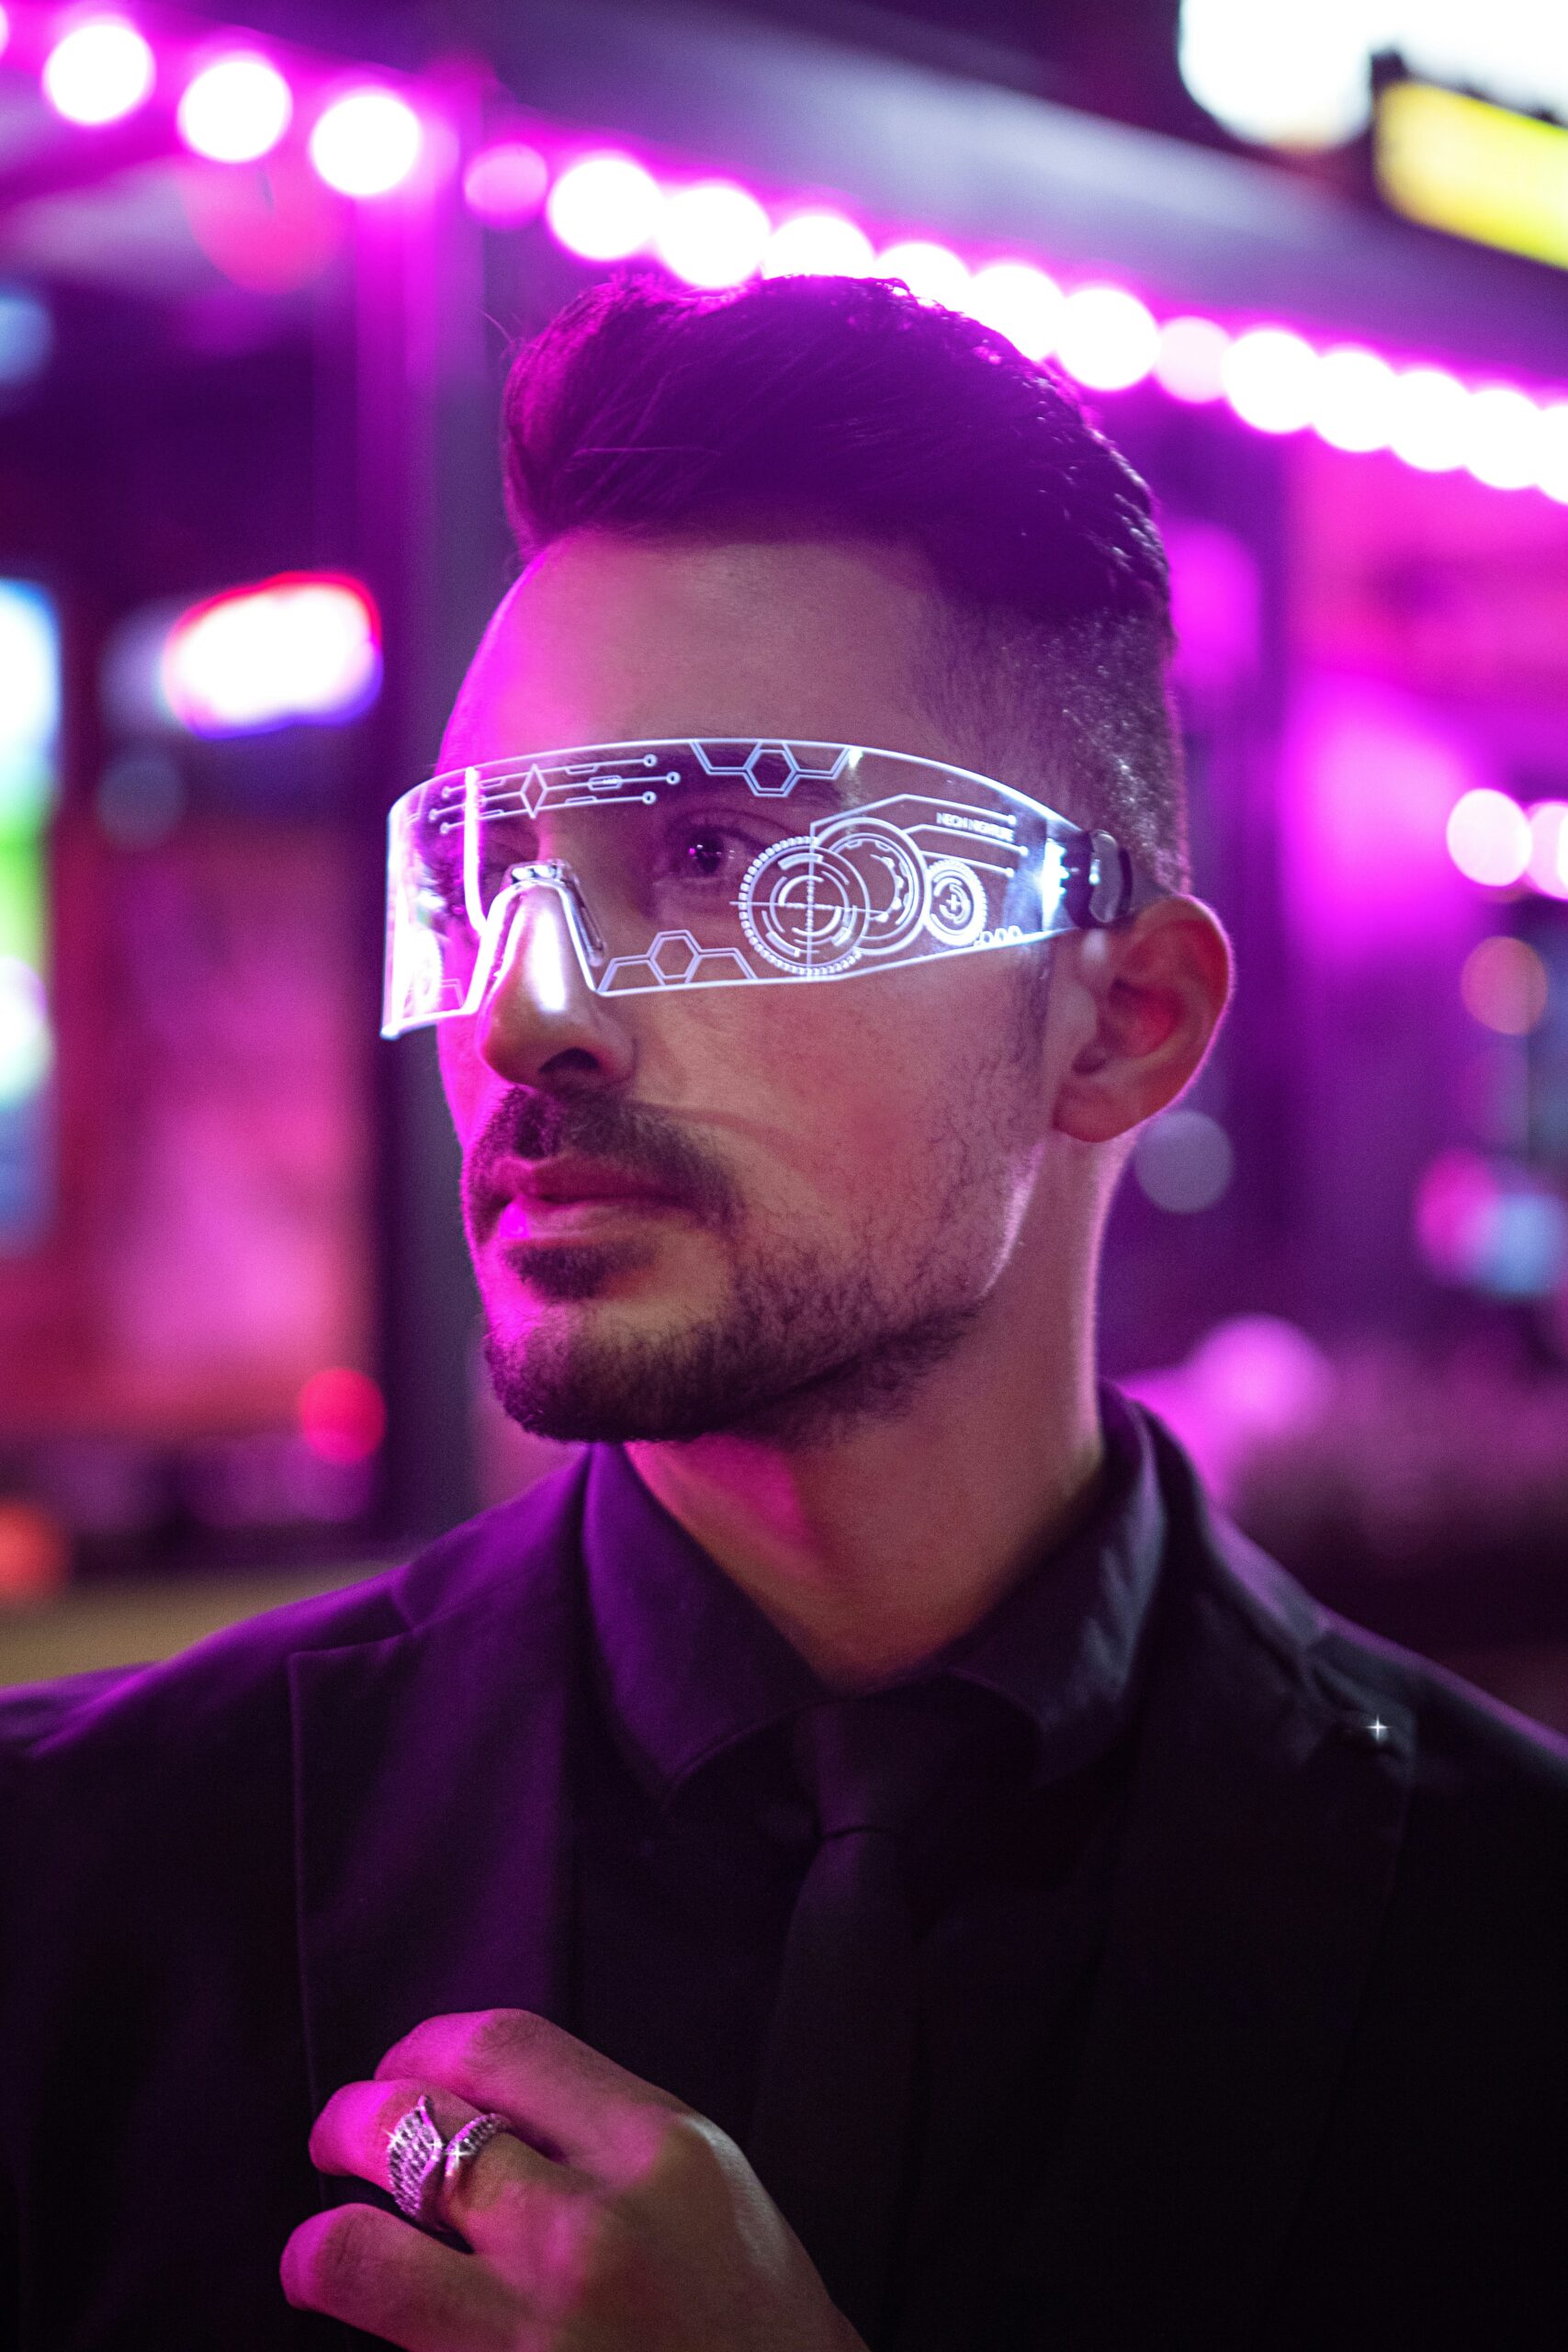 Smart Glasses Are On the Rise: Can They Help With Event Planning?